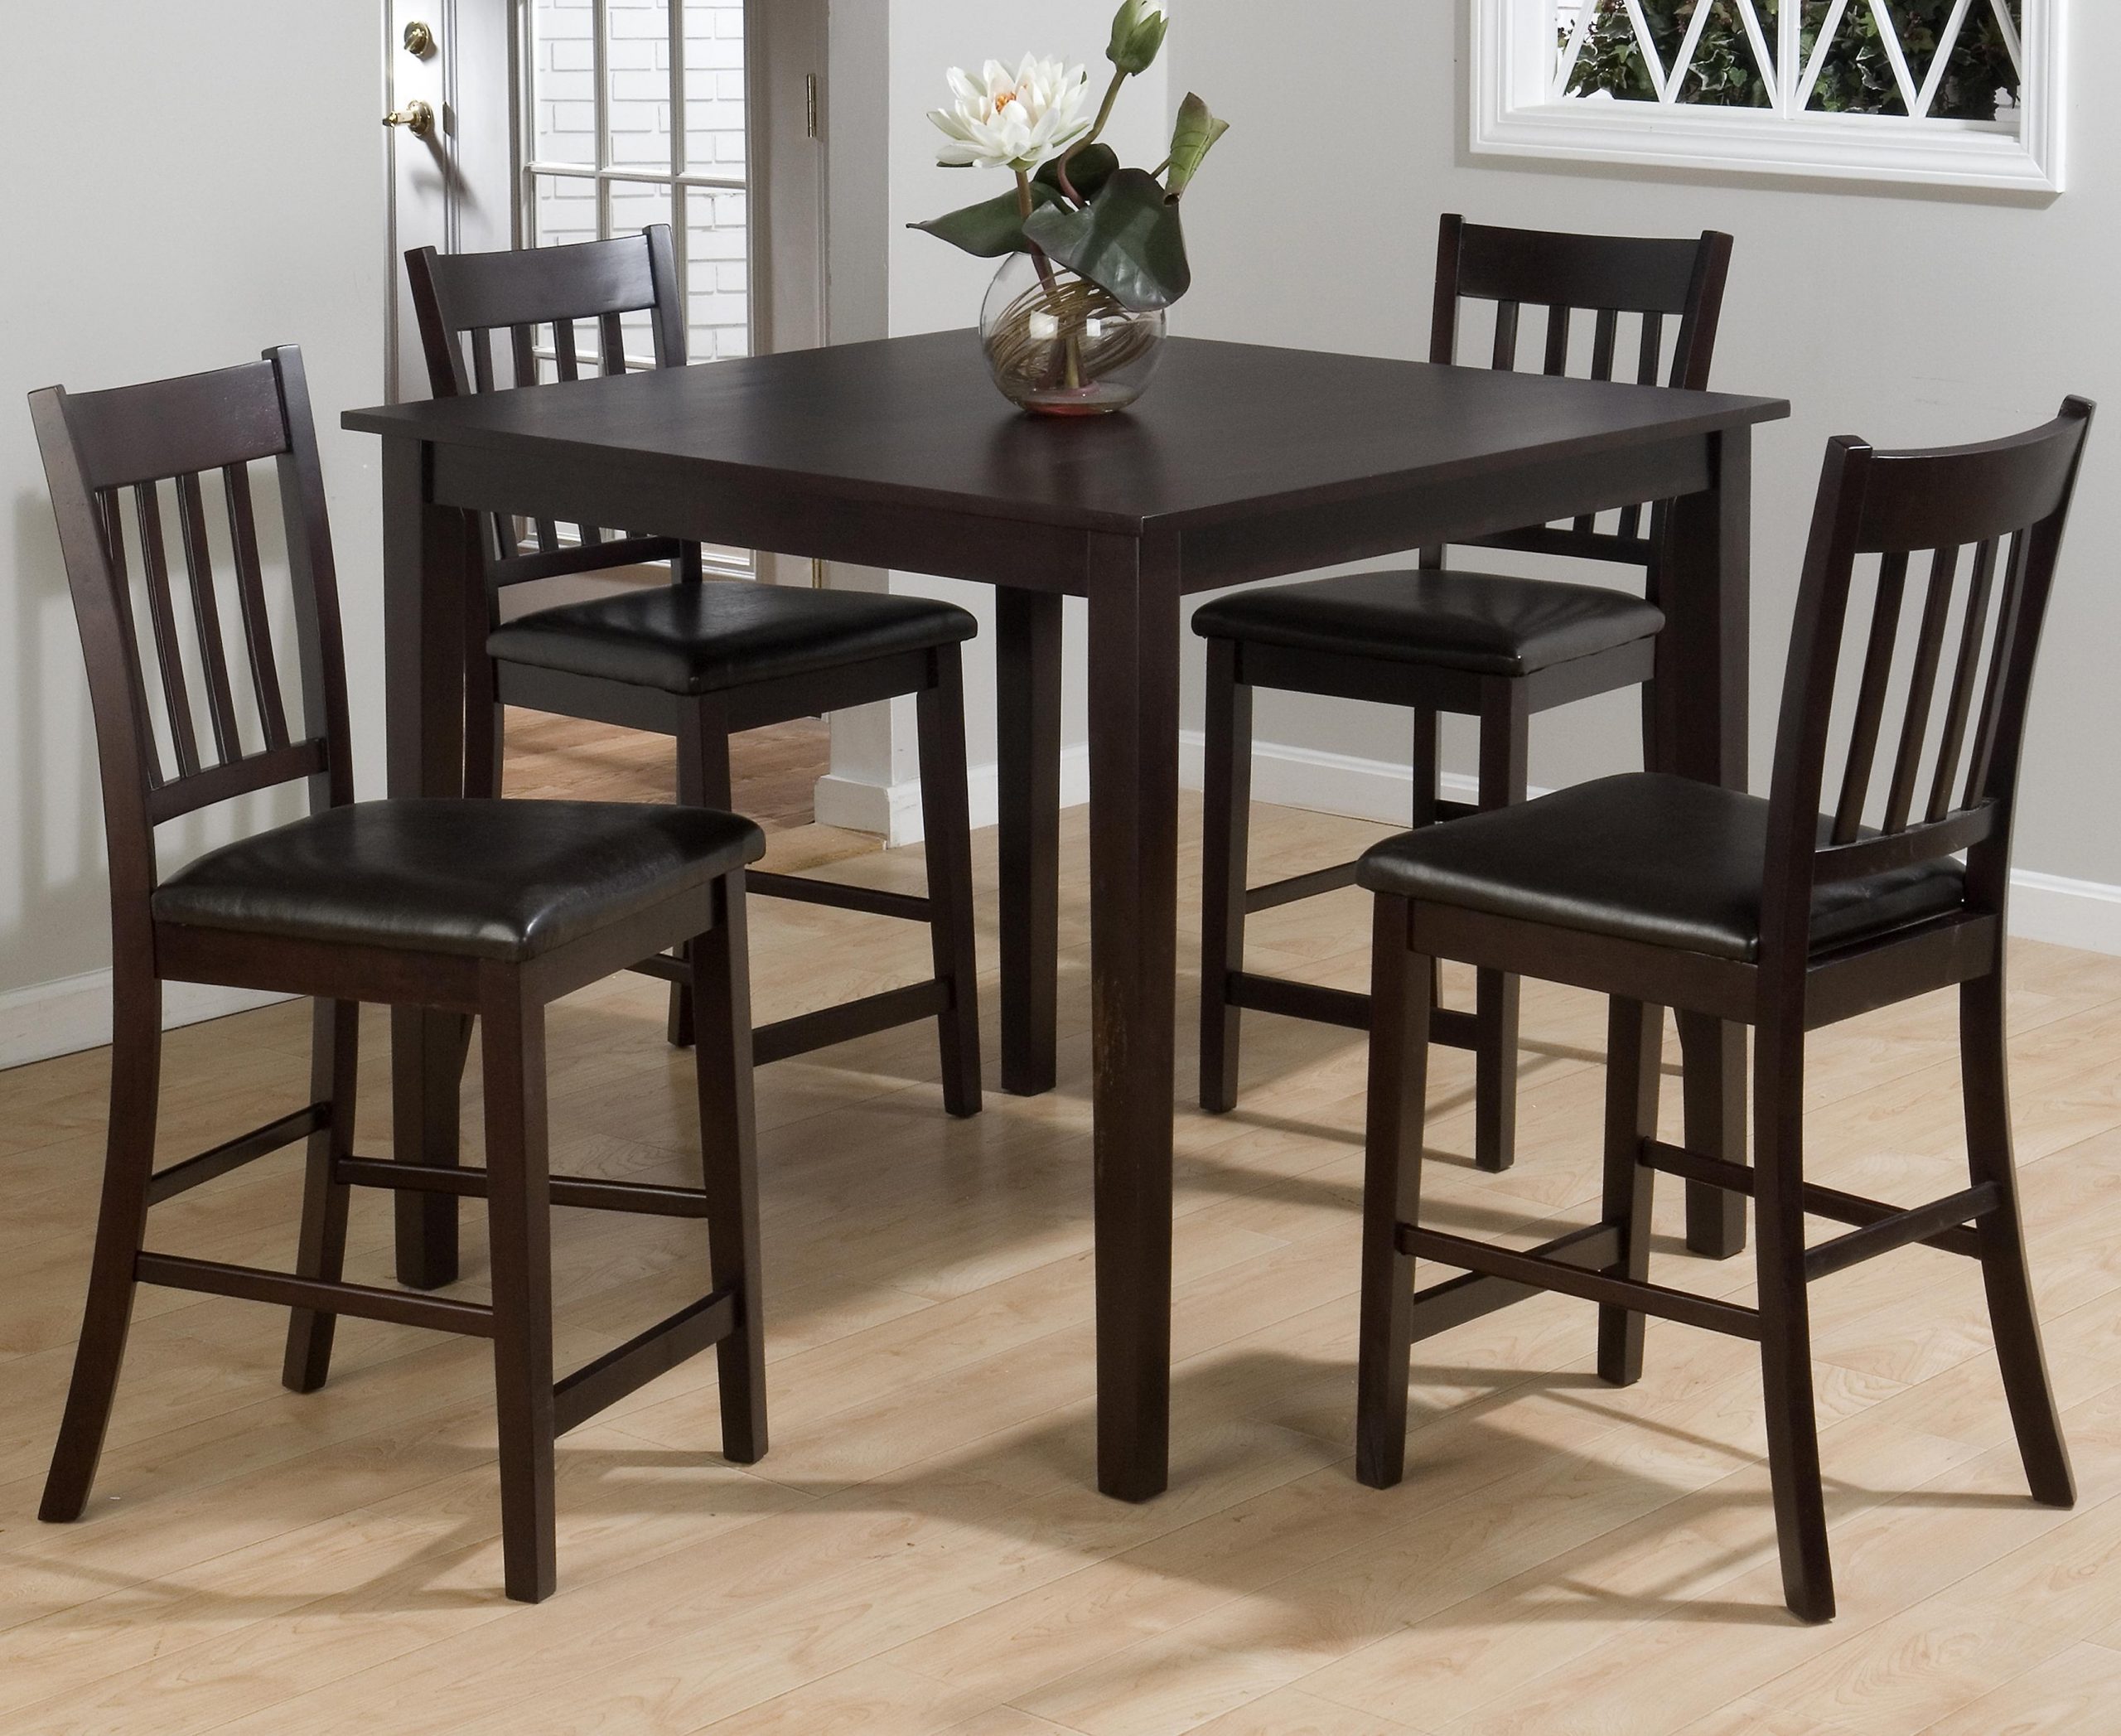 Big Lots Dining Room Tables For Sale